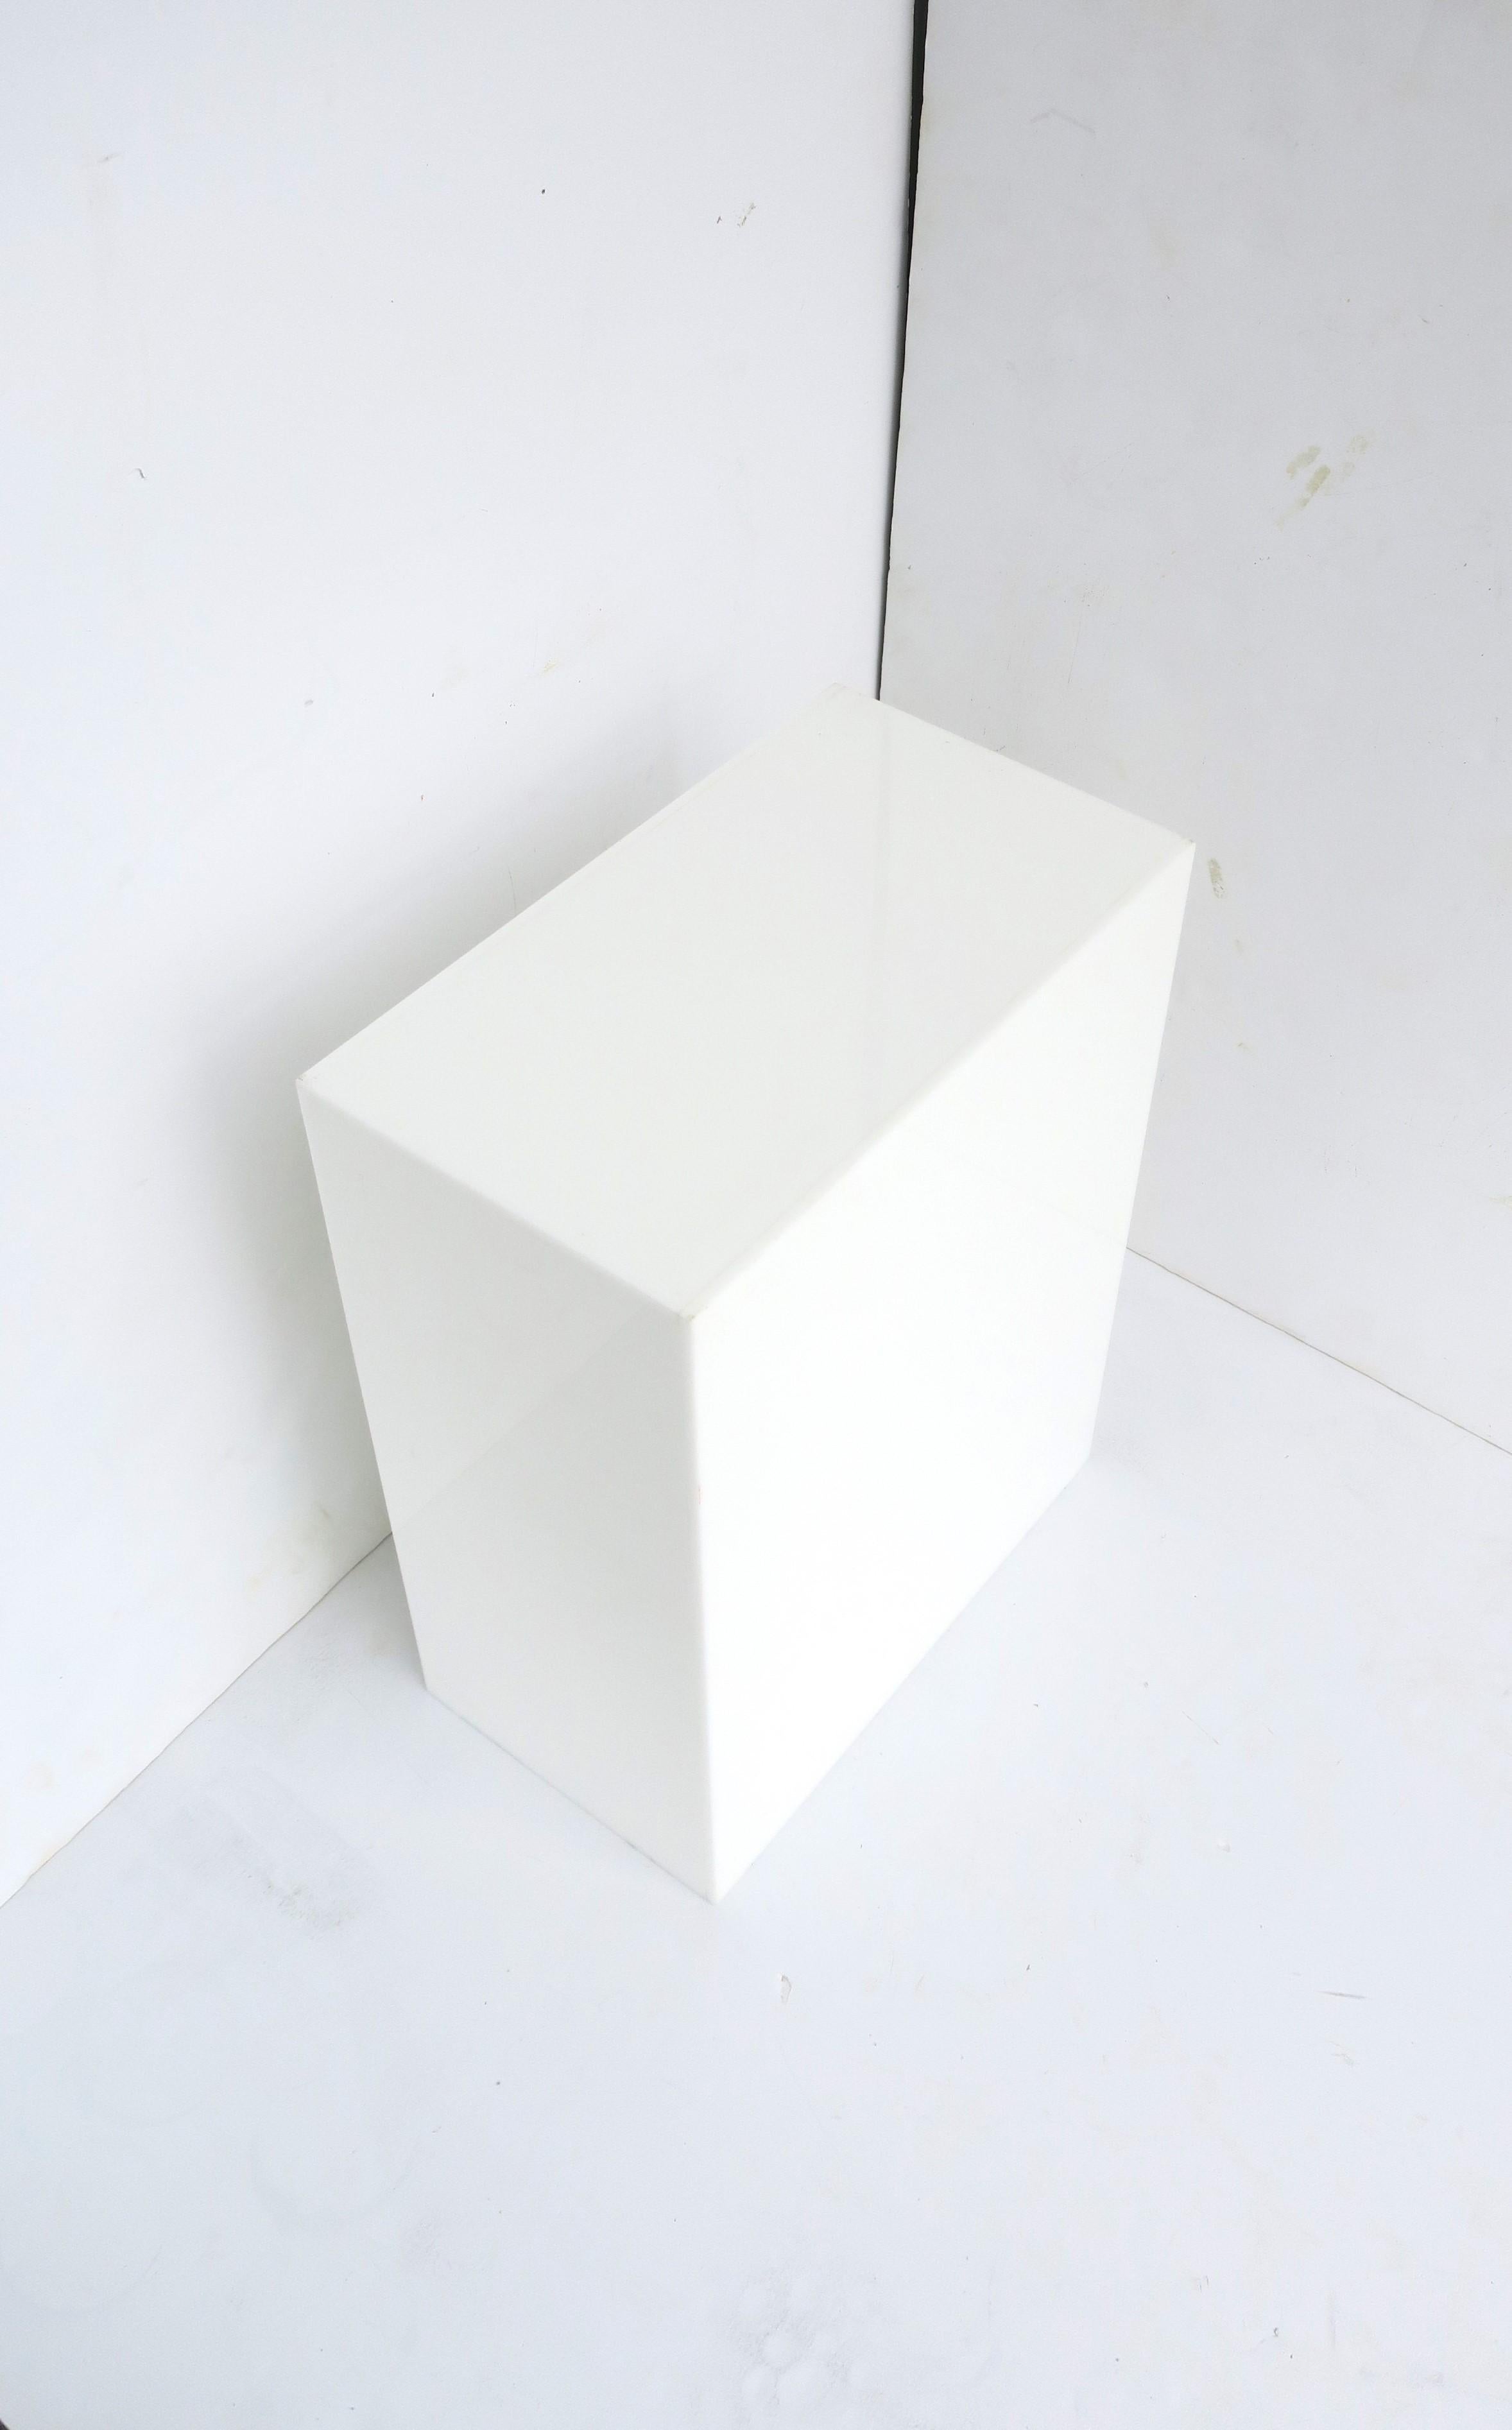 A lightweight white acrylic pedestal column stand or drinks table, in the modern or postmodern design style, circa late-20th century to early 21st century. Piece could work as a small drinks table, display pedestal for small sculpture, a plant,